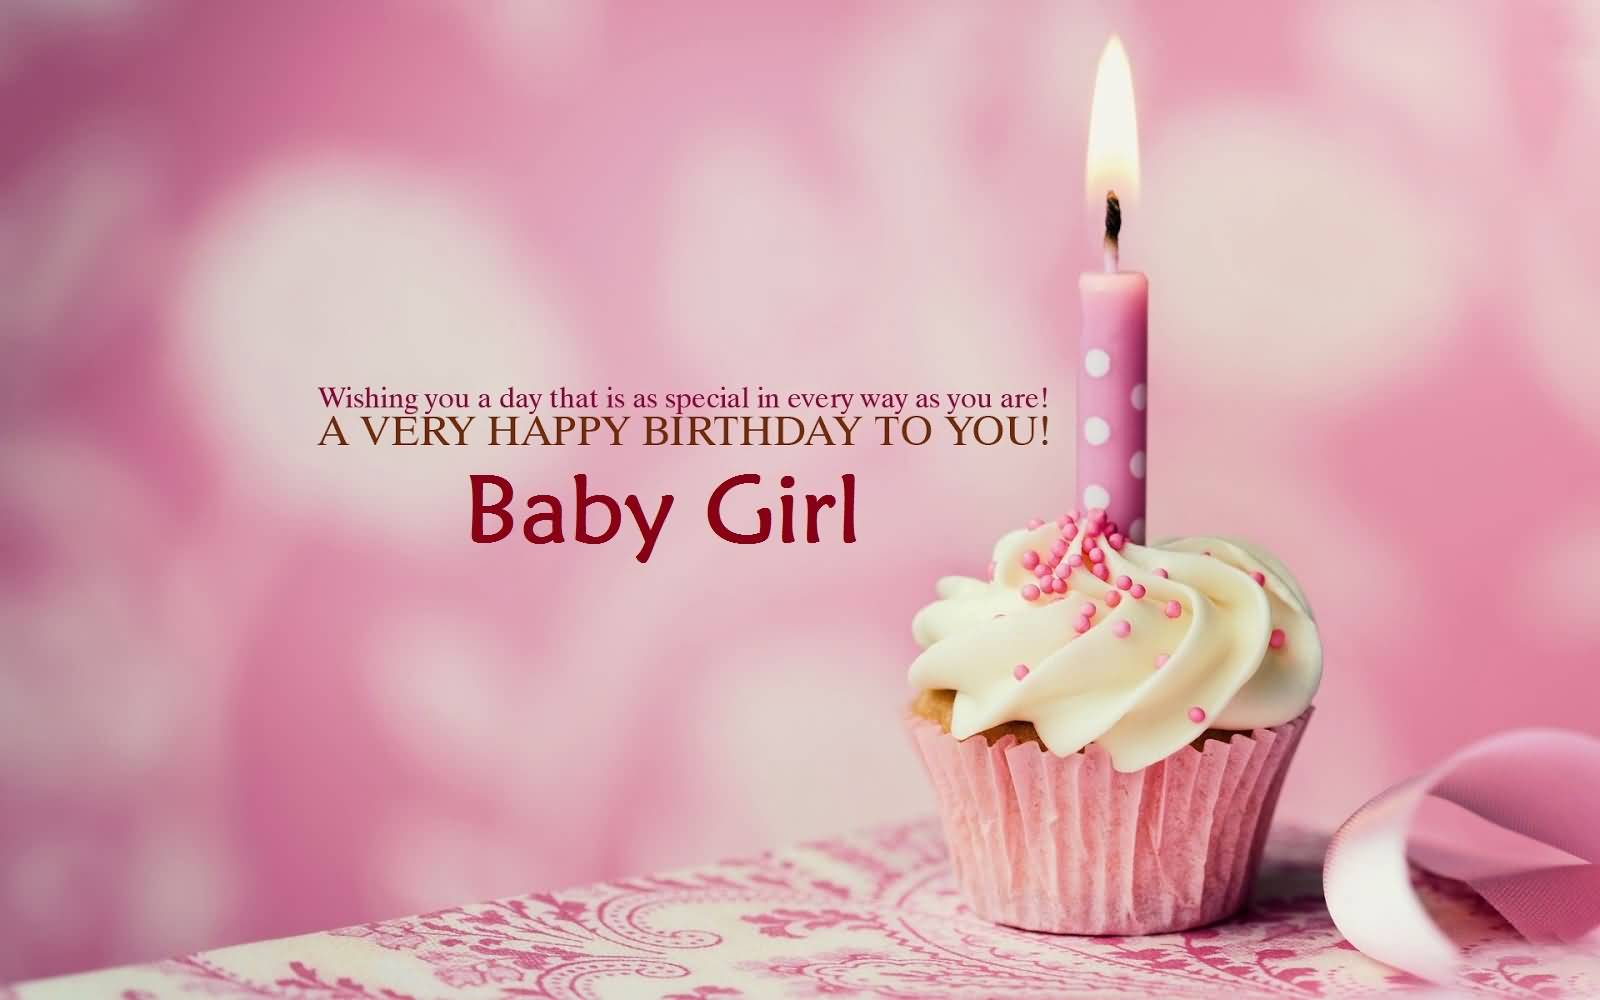 Cute Baby Girl Birthday Wishes, Picture, Image & Wallpaper